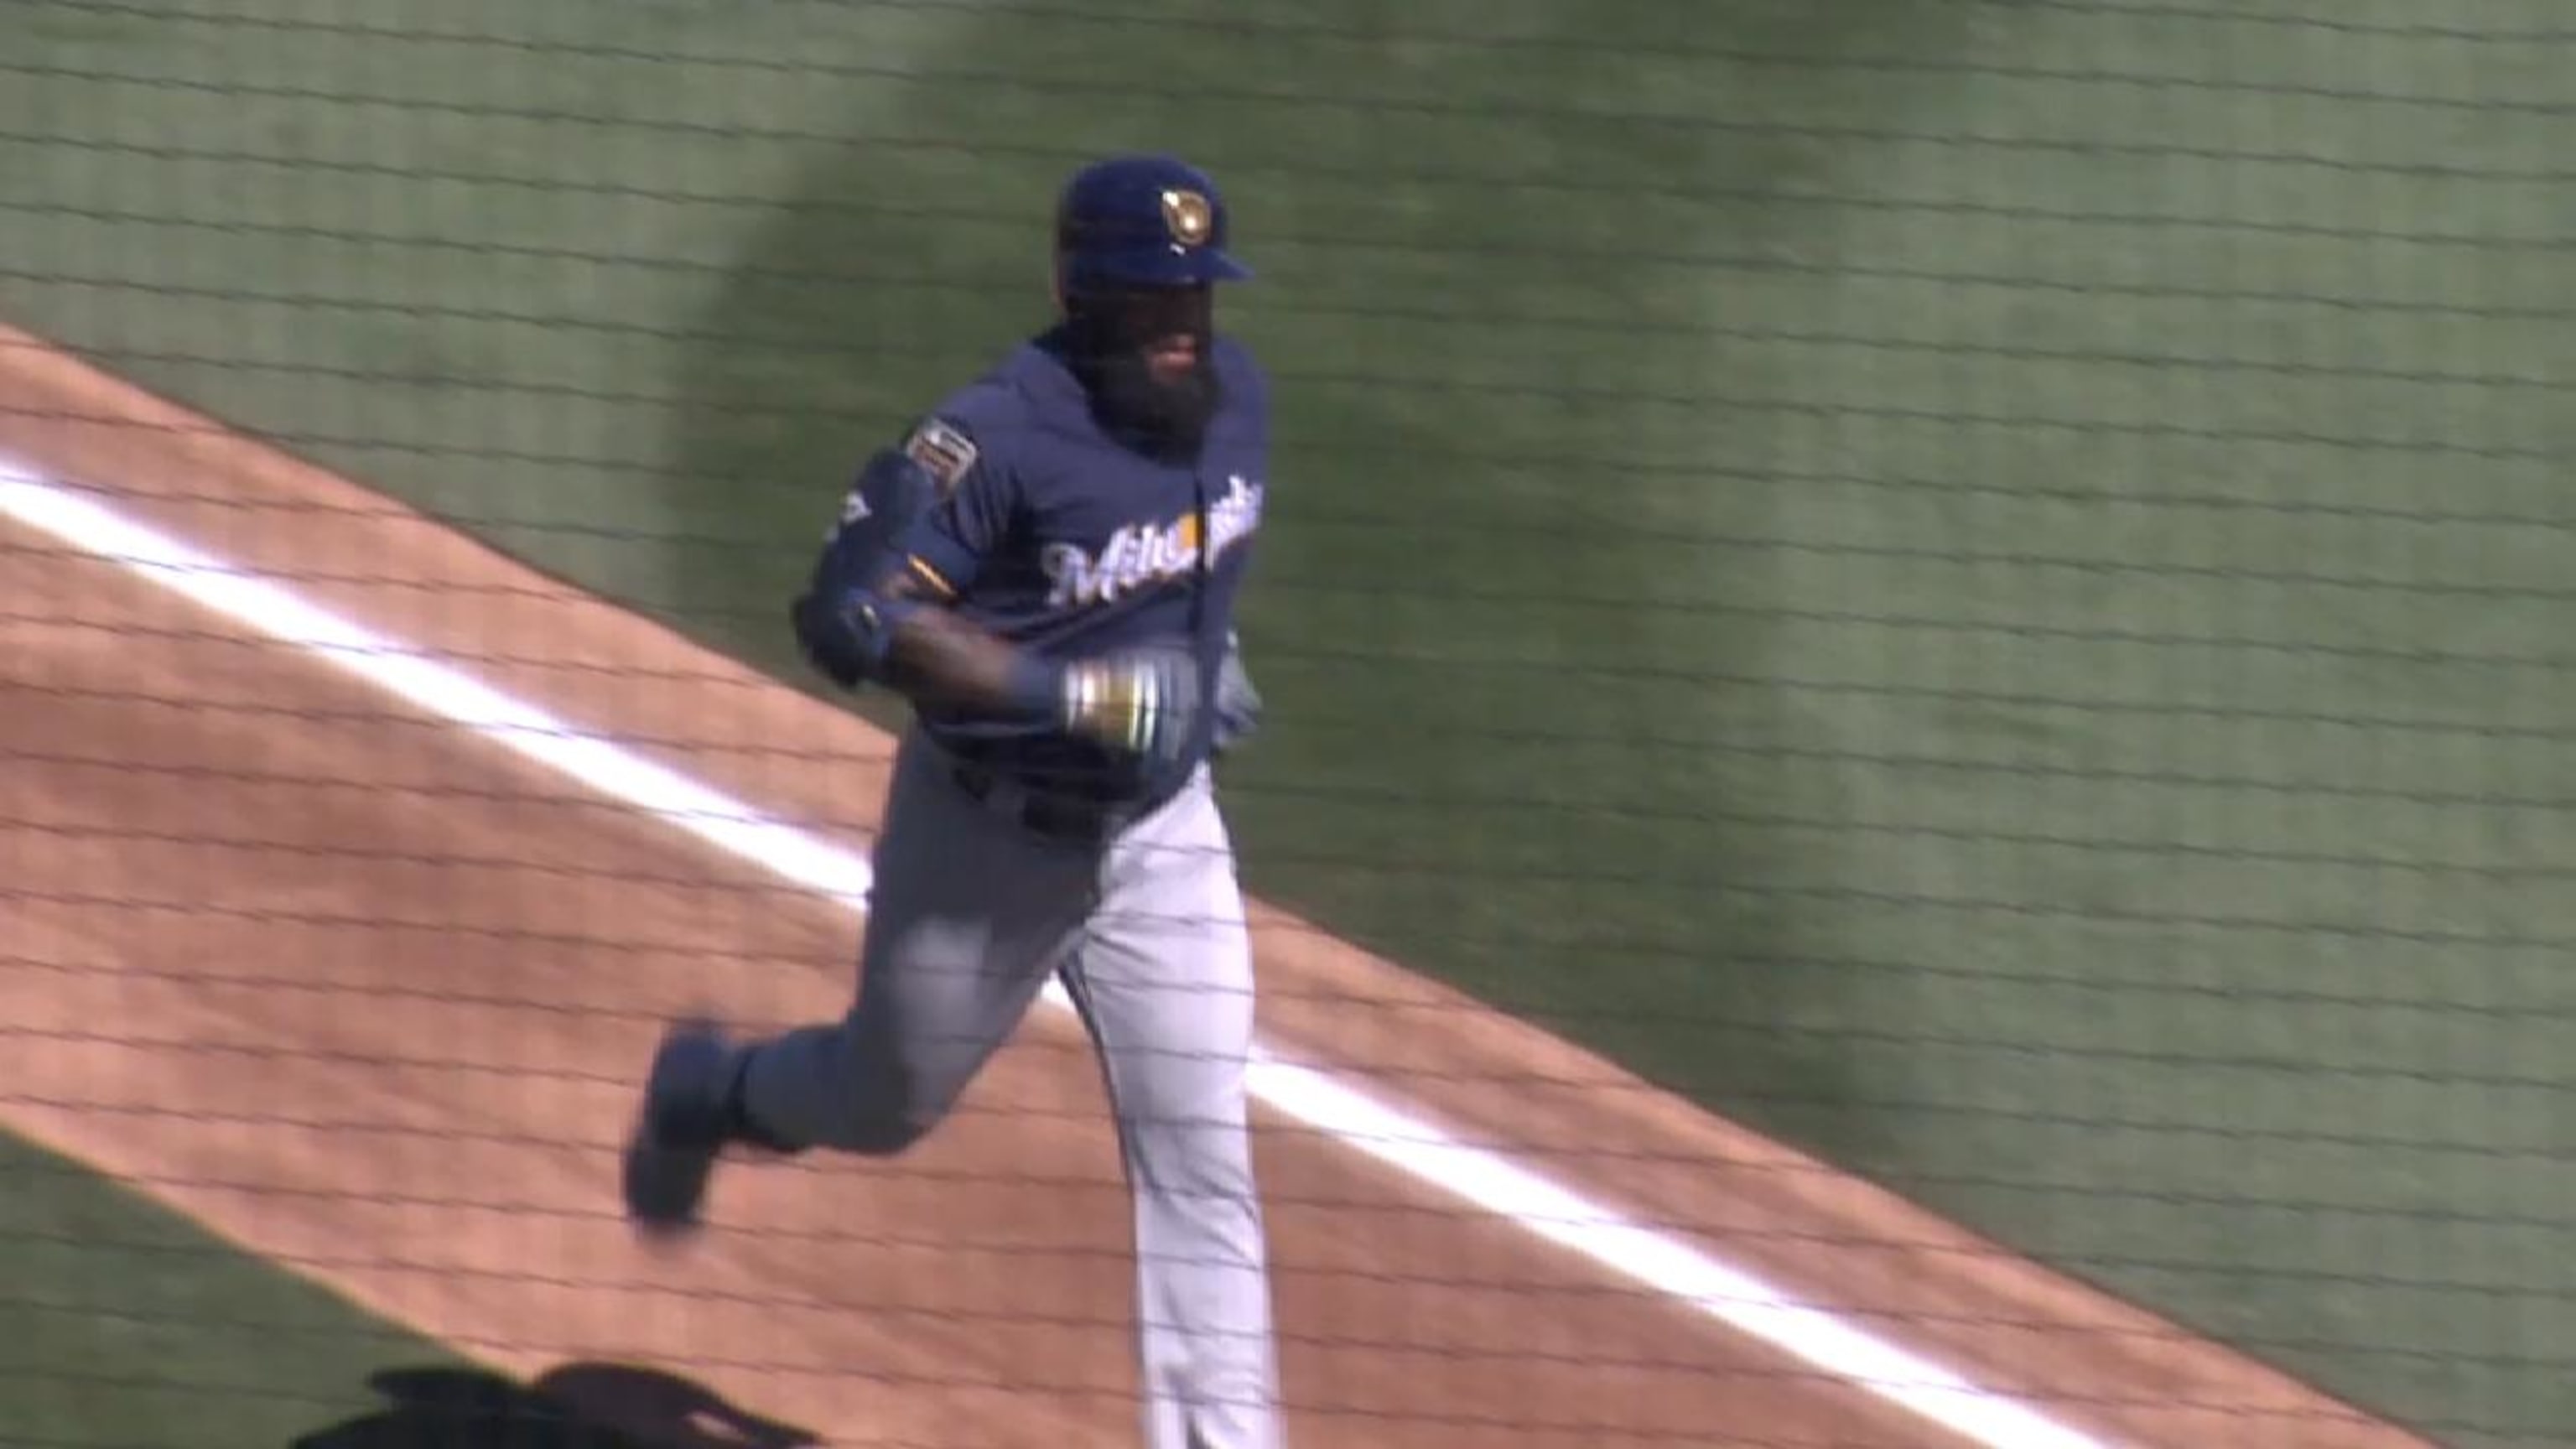 Eric Thames, deflecting PED talk, carves out future while Ryan